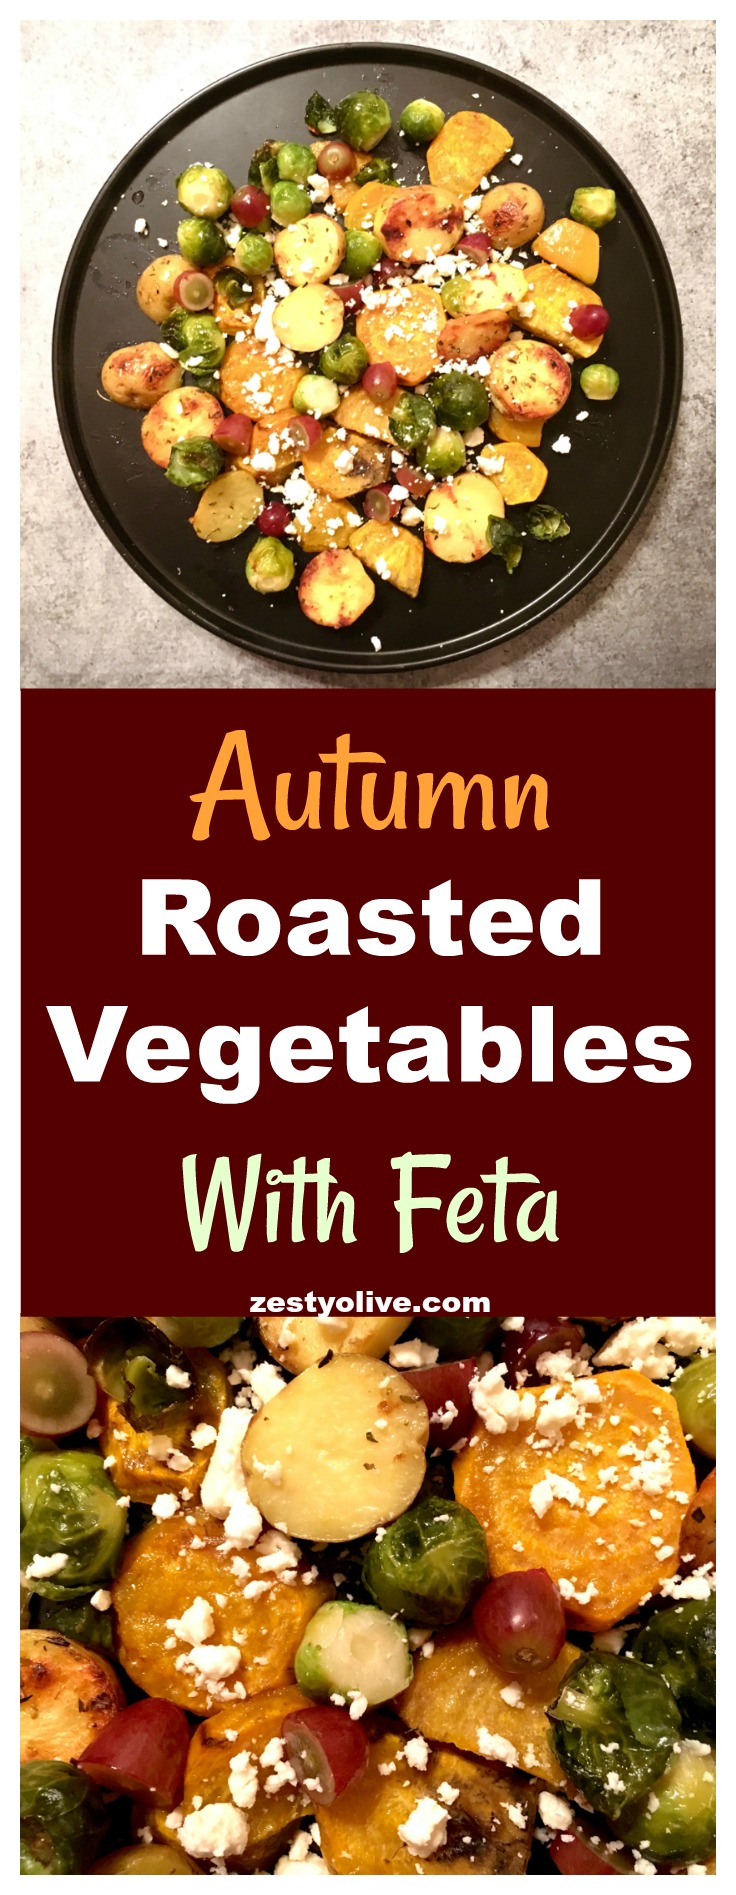 Autumn Roasted Vegetables with Feta